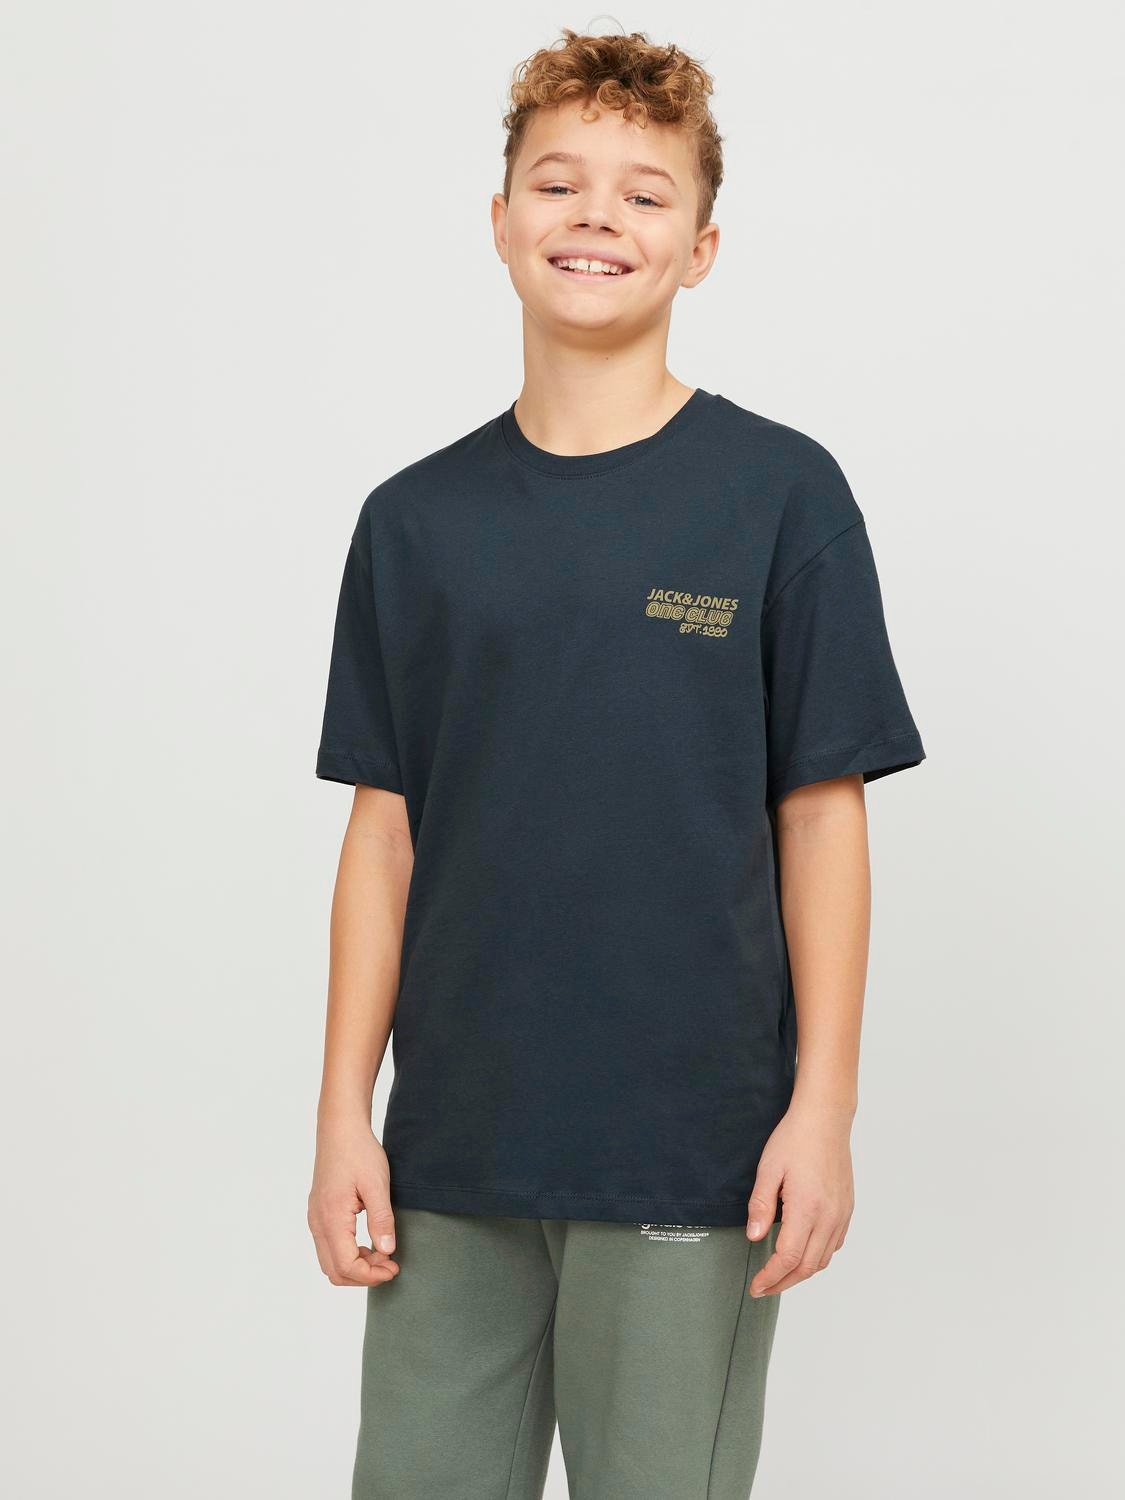 Jack & Jones T-shirt Stampato Per Bambino -Magical Forest - 12262090